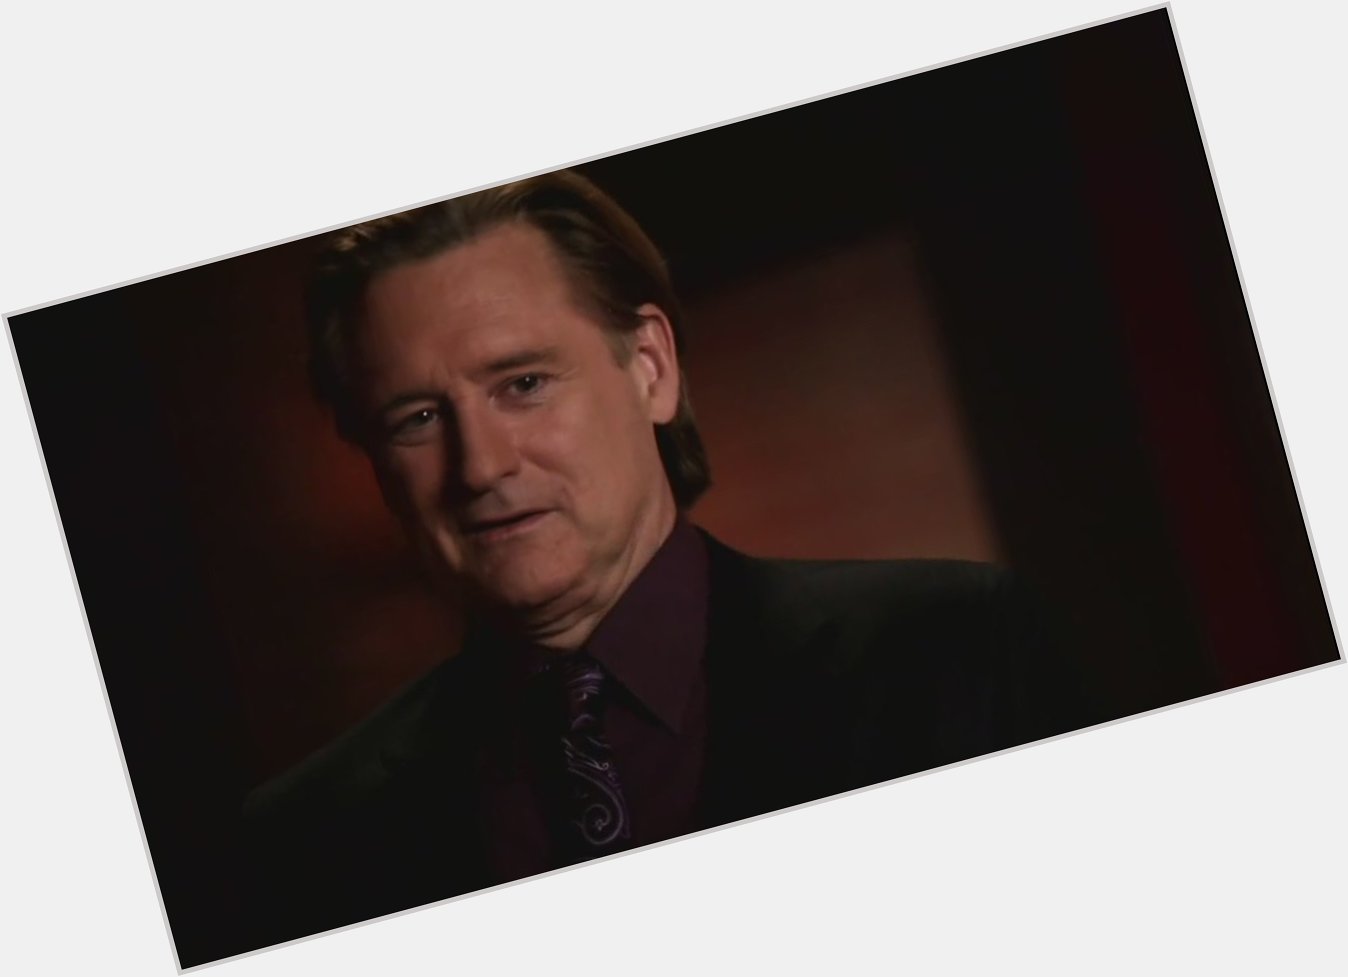 Happy Birthday to Bill Pullman who played Oswald Danes in Torchwood - Miracle Day. 